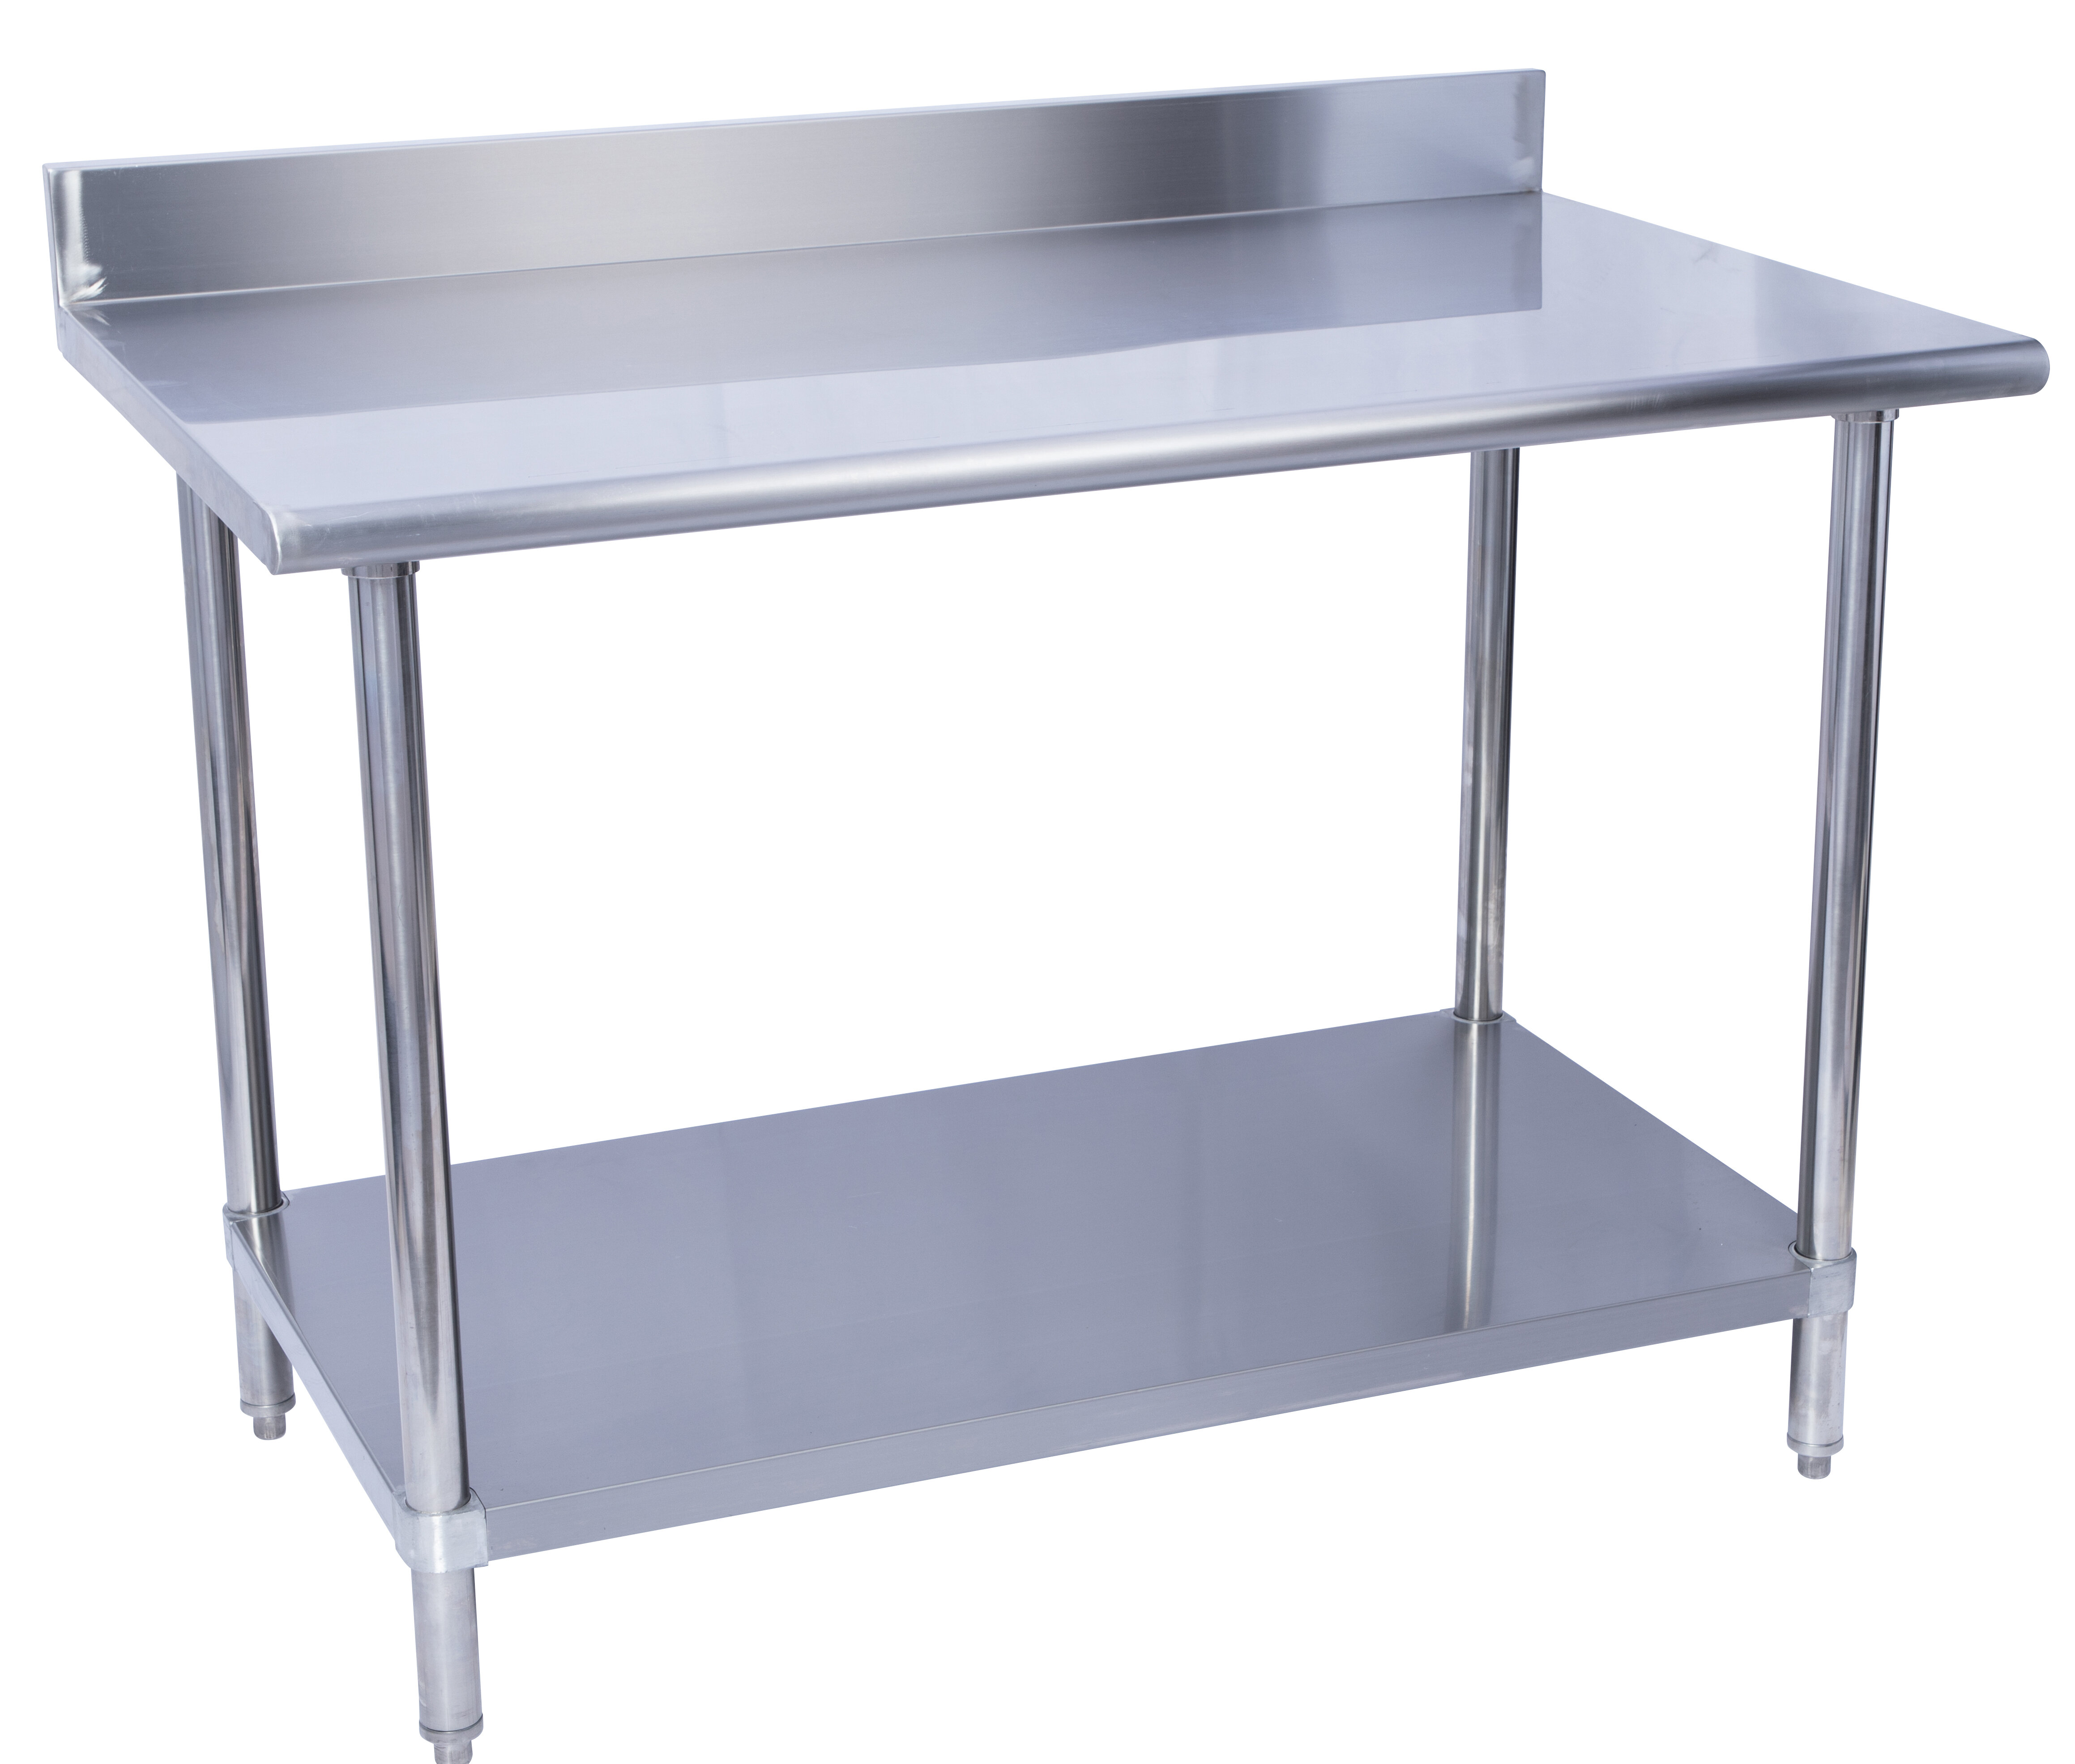 INSMA Adjustable 3-5FT Stainless Steel Kitchen Catering Work Table Bench Worktop 